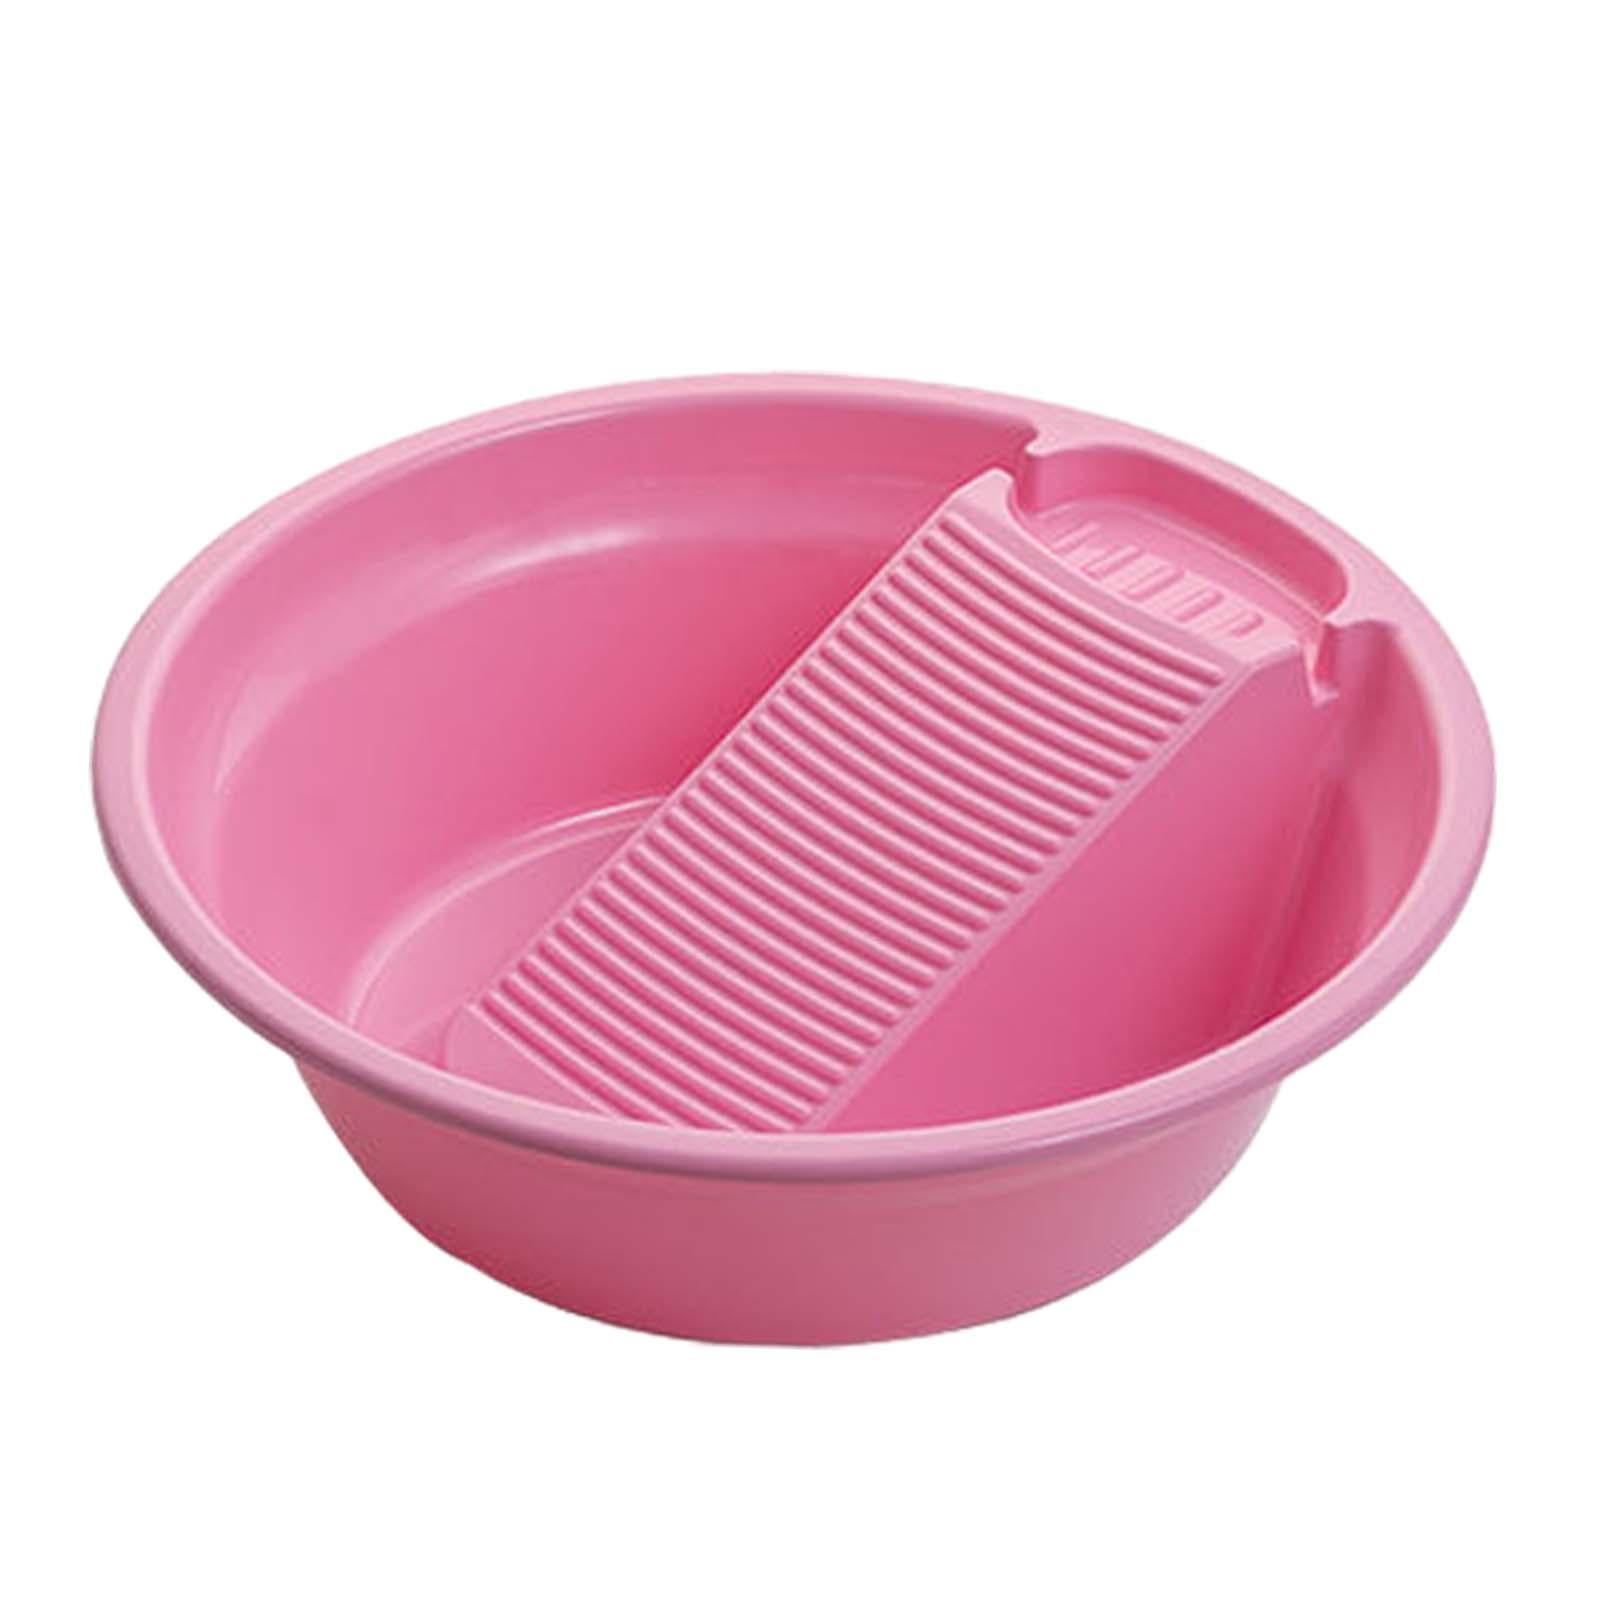 Washboard Basin for Hand Washing Clothes Laundry Tub for Blouses Shirt  Pants Pink 